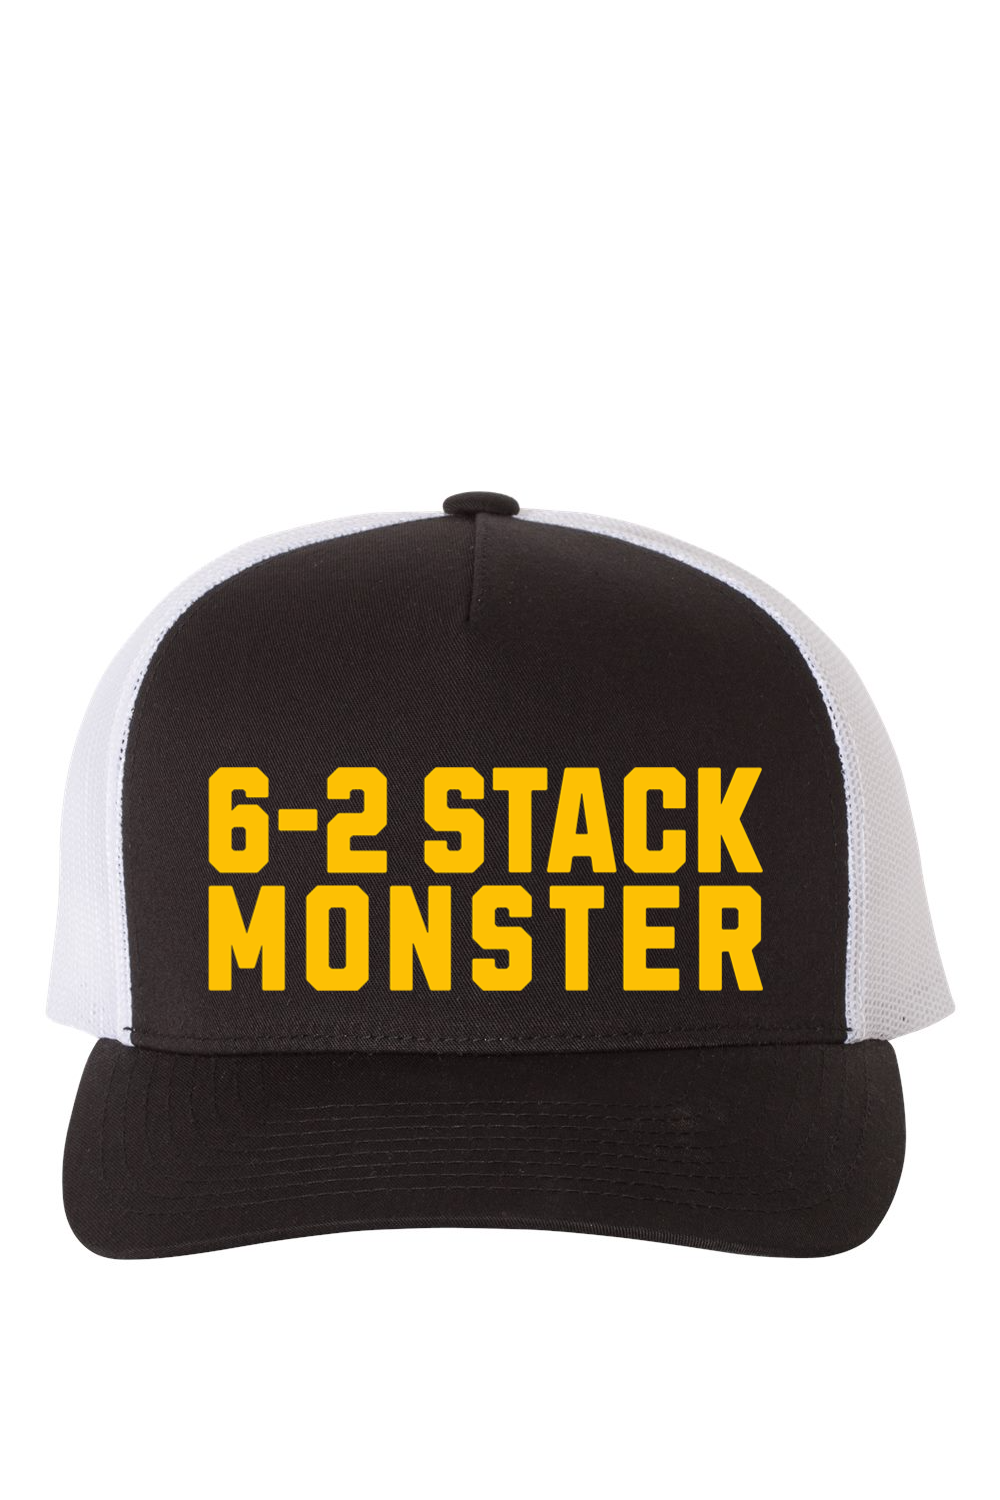 6-2 Stack Monster (All The Right Moves) - Classic Snapback Hat - Yinzylvania